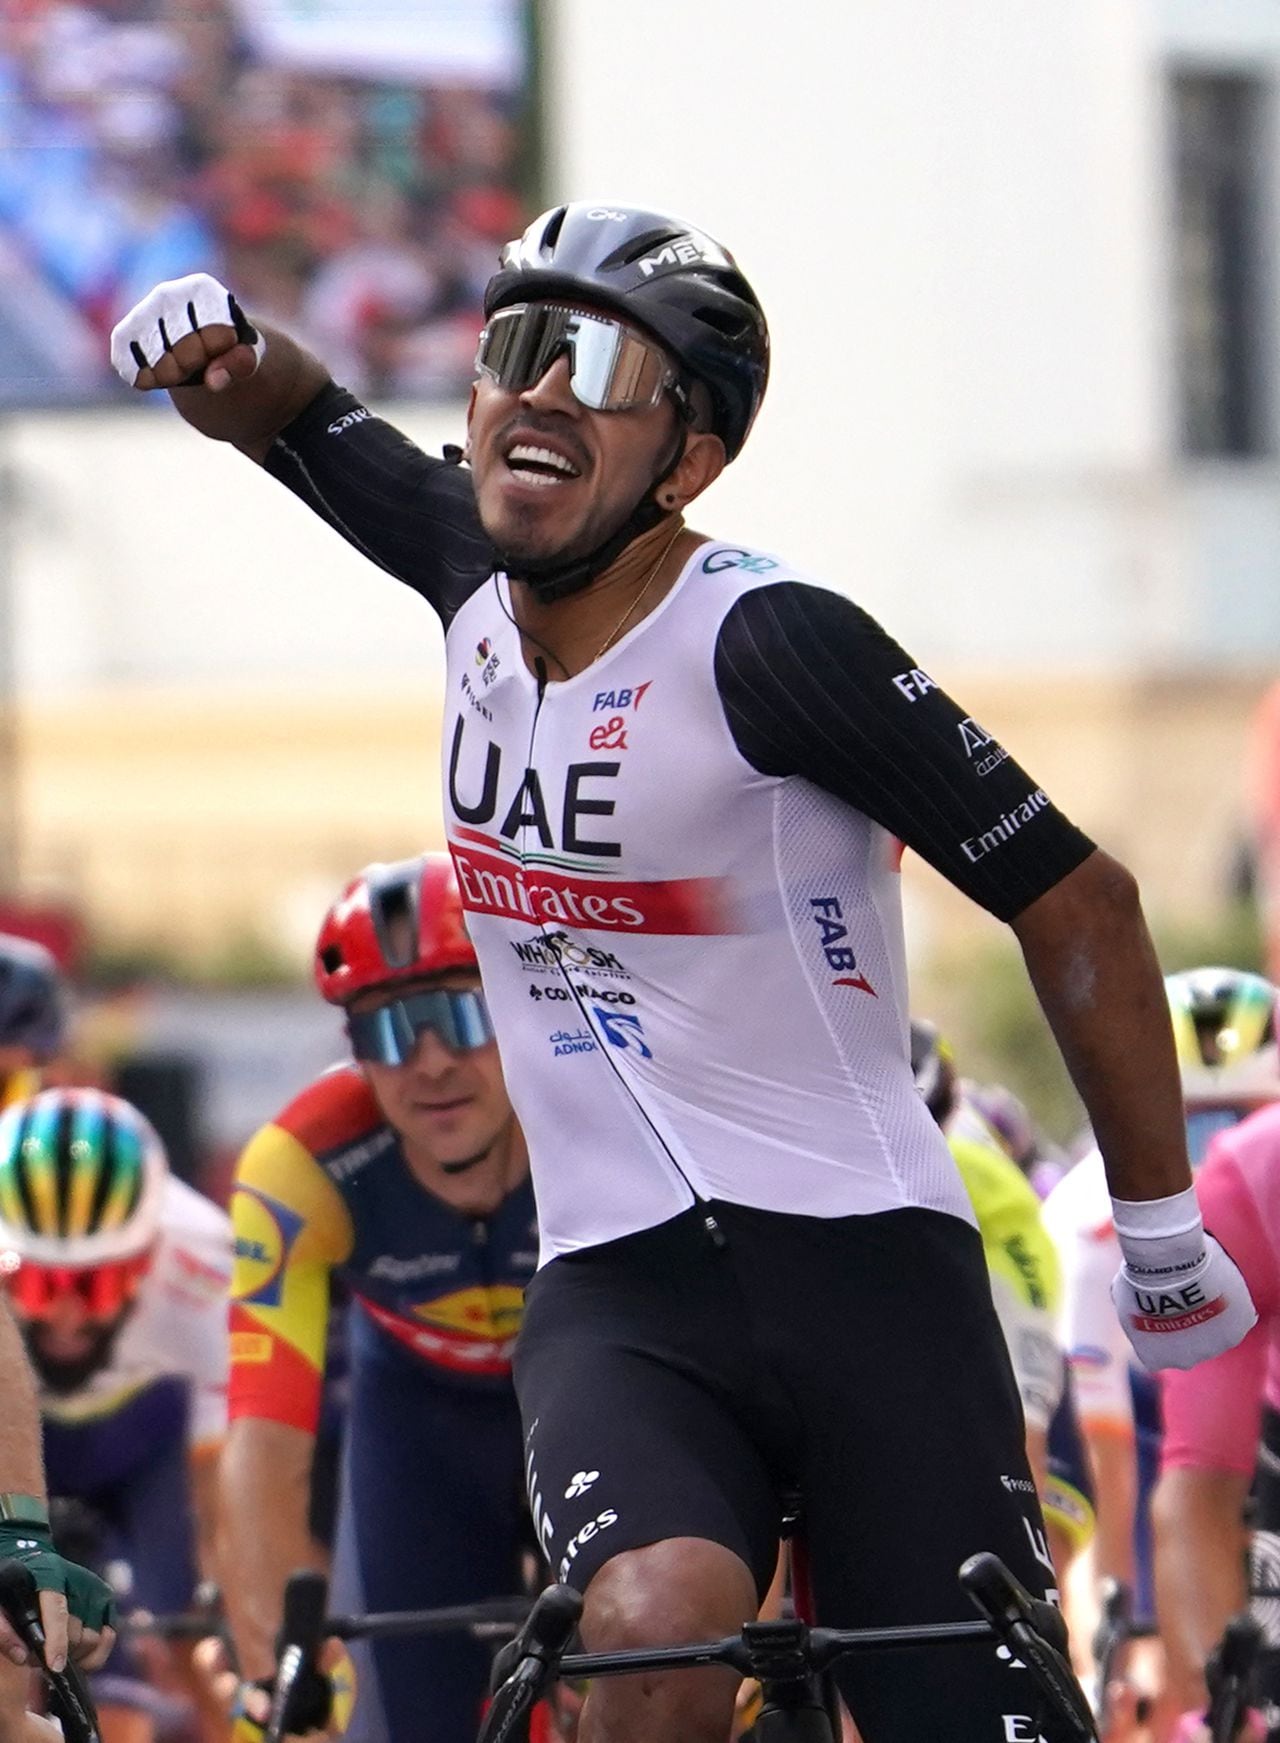 Team UAE Emirates' Columbian rider Sebastian Molano celebrates after winning the stage 12 of the 2023 La Vuelta cycling tour of Spain, a 150,6 km race between Olvega and Zaragoza, on September 7, 2023. (Photo by CESAR MANSO / AFP)